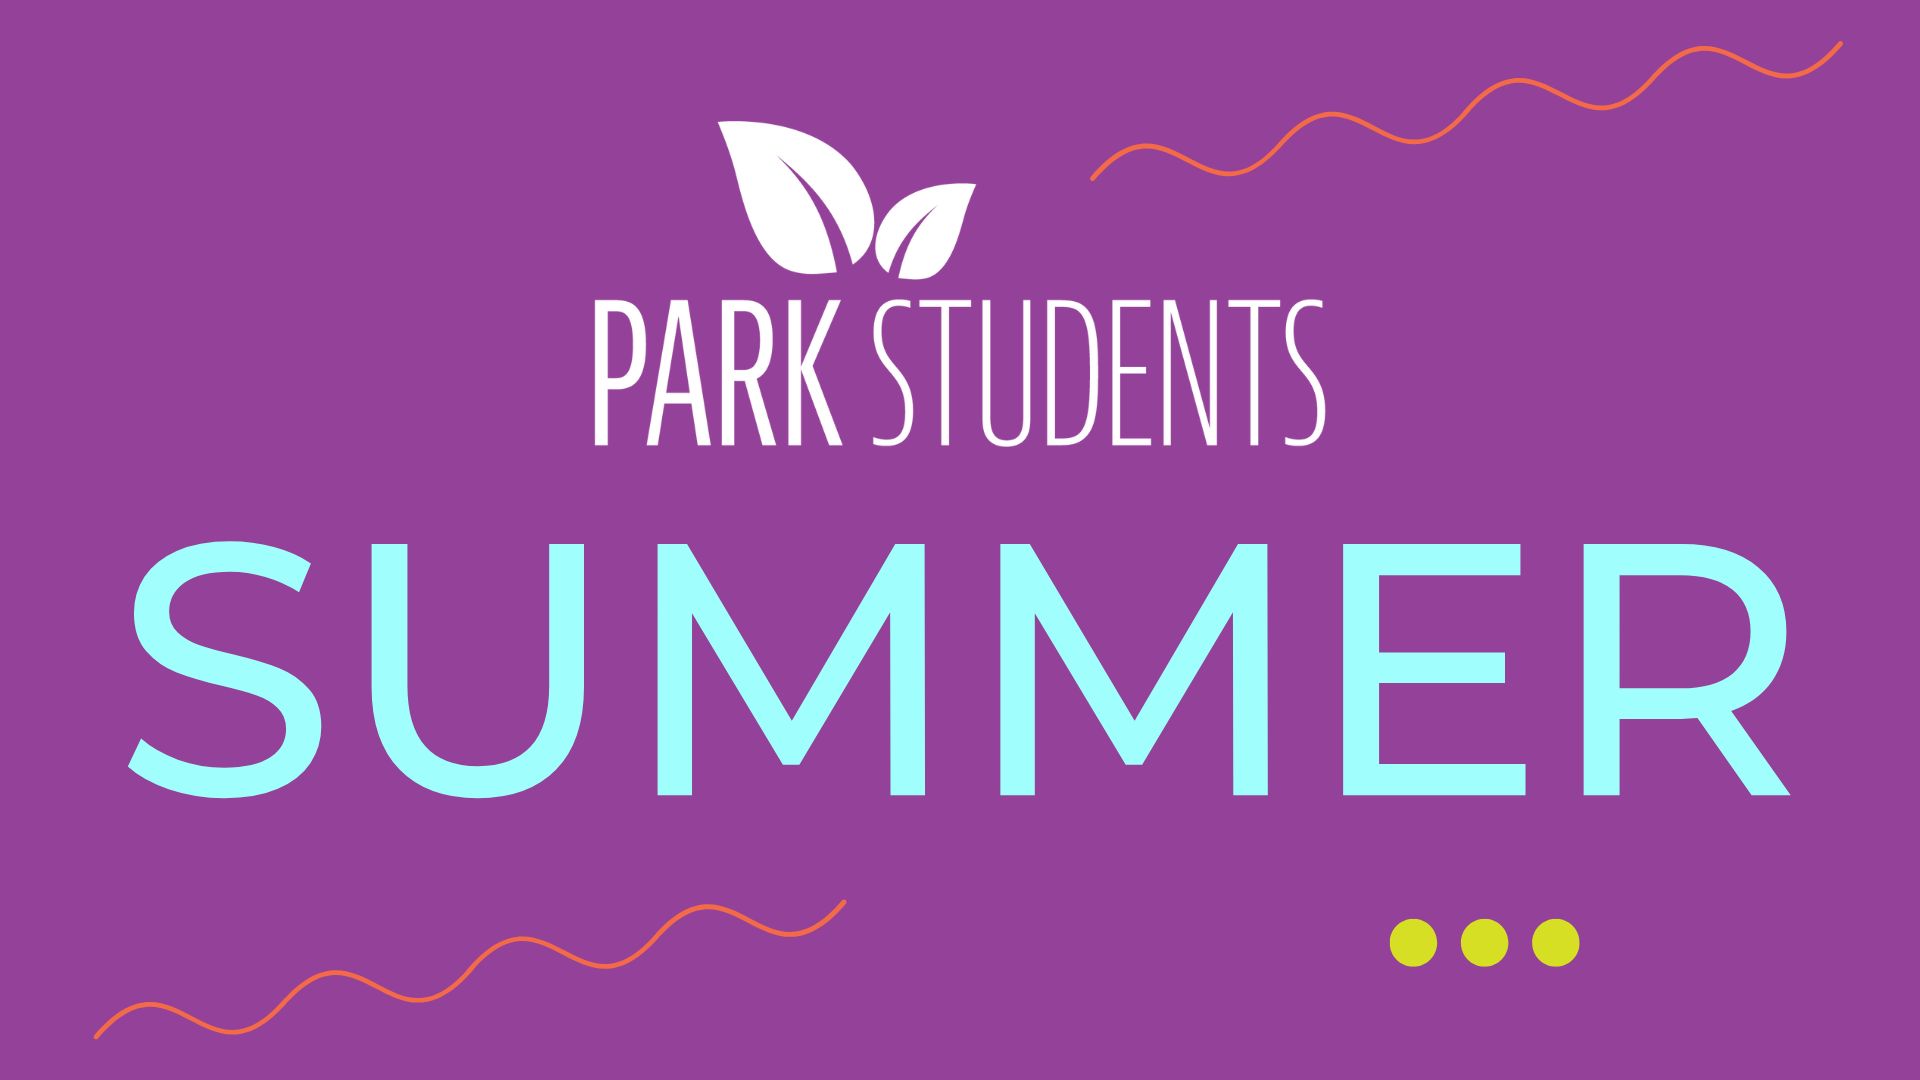 Bright graphic squiggles and dots with Park Students logo